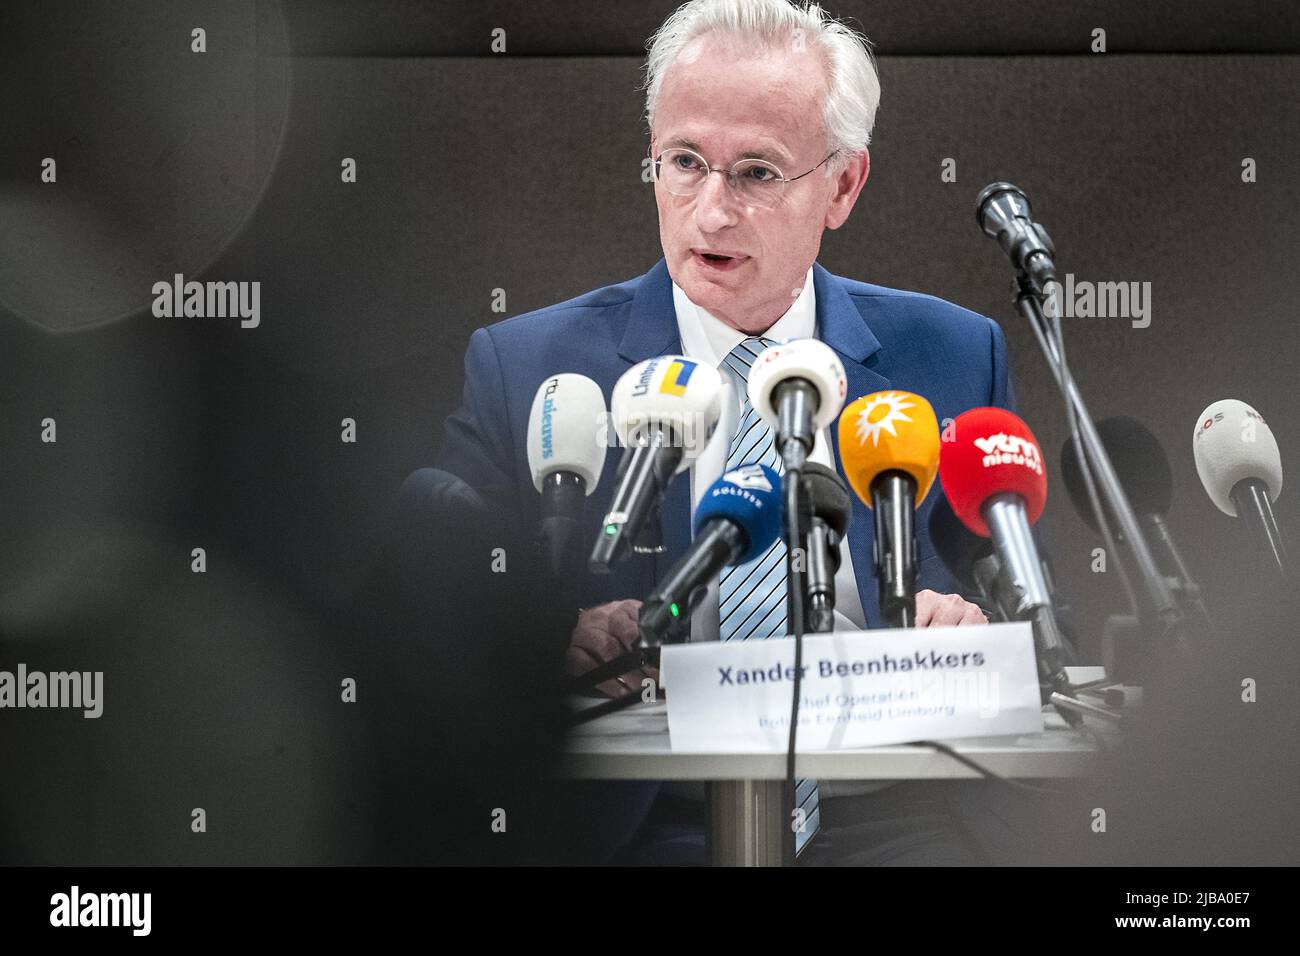 2022-06-04 16:36:54 MAASTRICHT - Mayor of Sittard-Geleen Xander Beenhakkers during a press conference at the police station about the case of the missing boy Gino. ANP ROB ENGELAAR netherlands out - belgium out Stock Photo